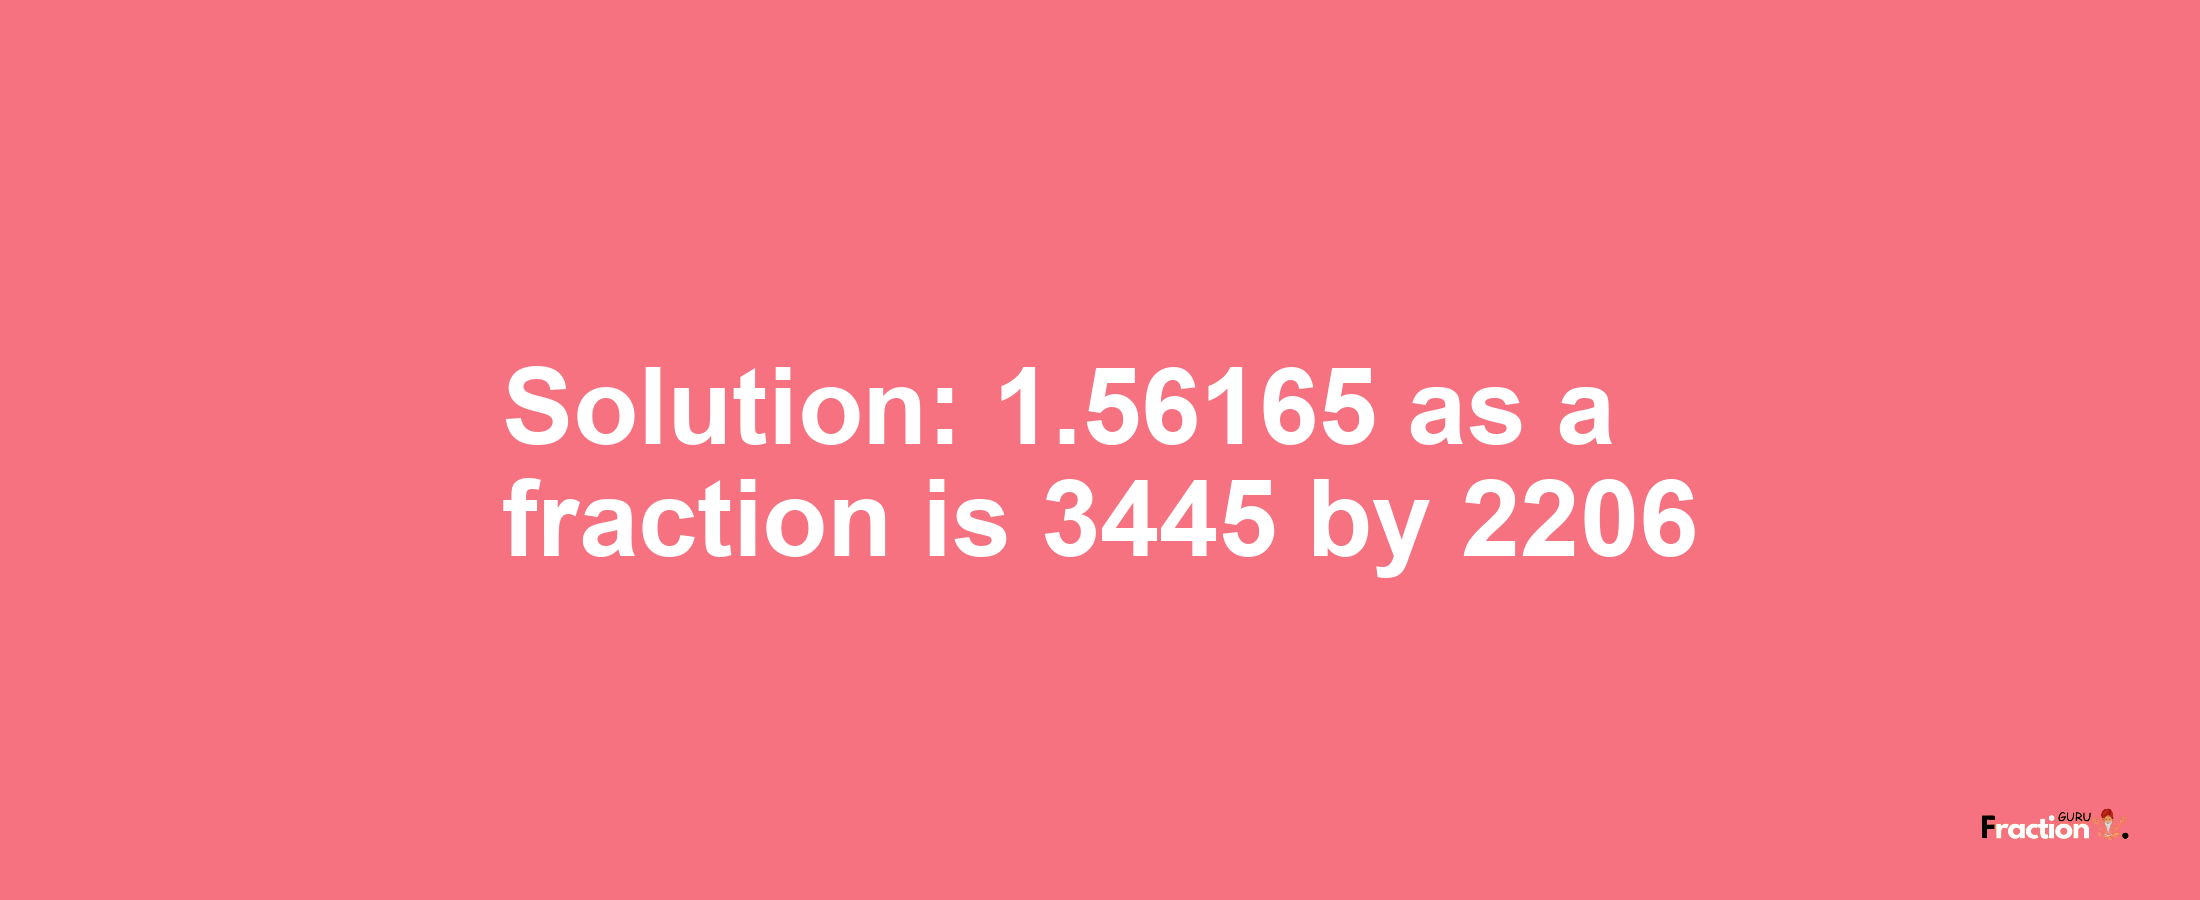 Solution:1.56165 as a fraction is 3445/2206